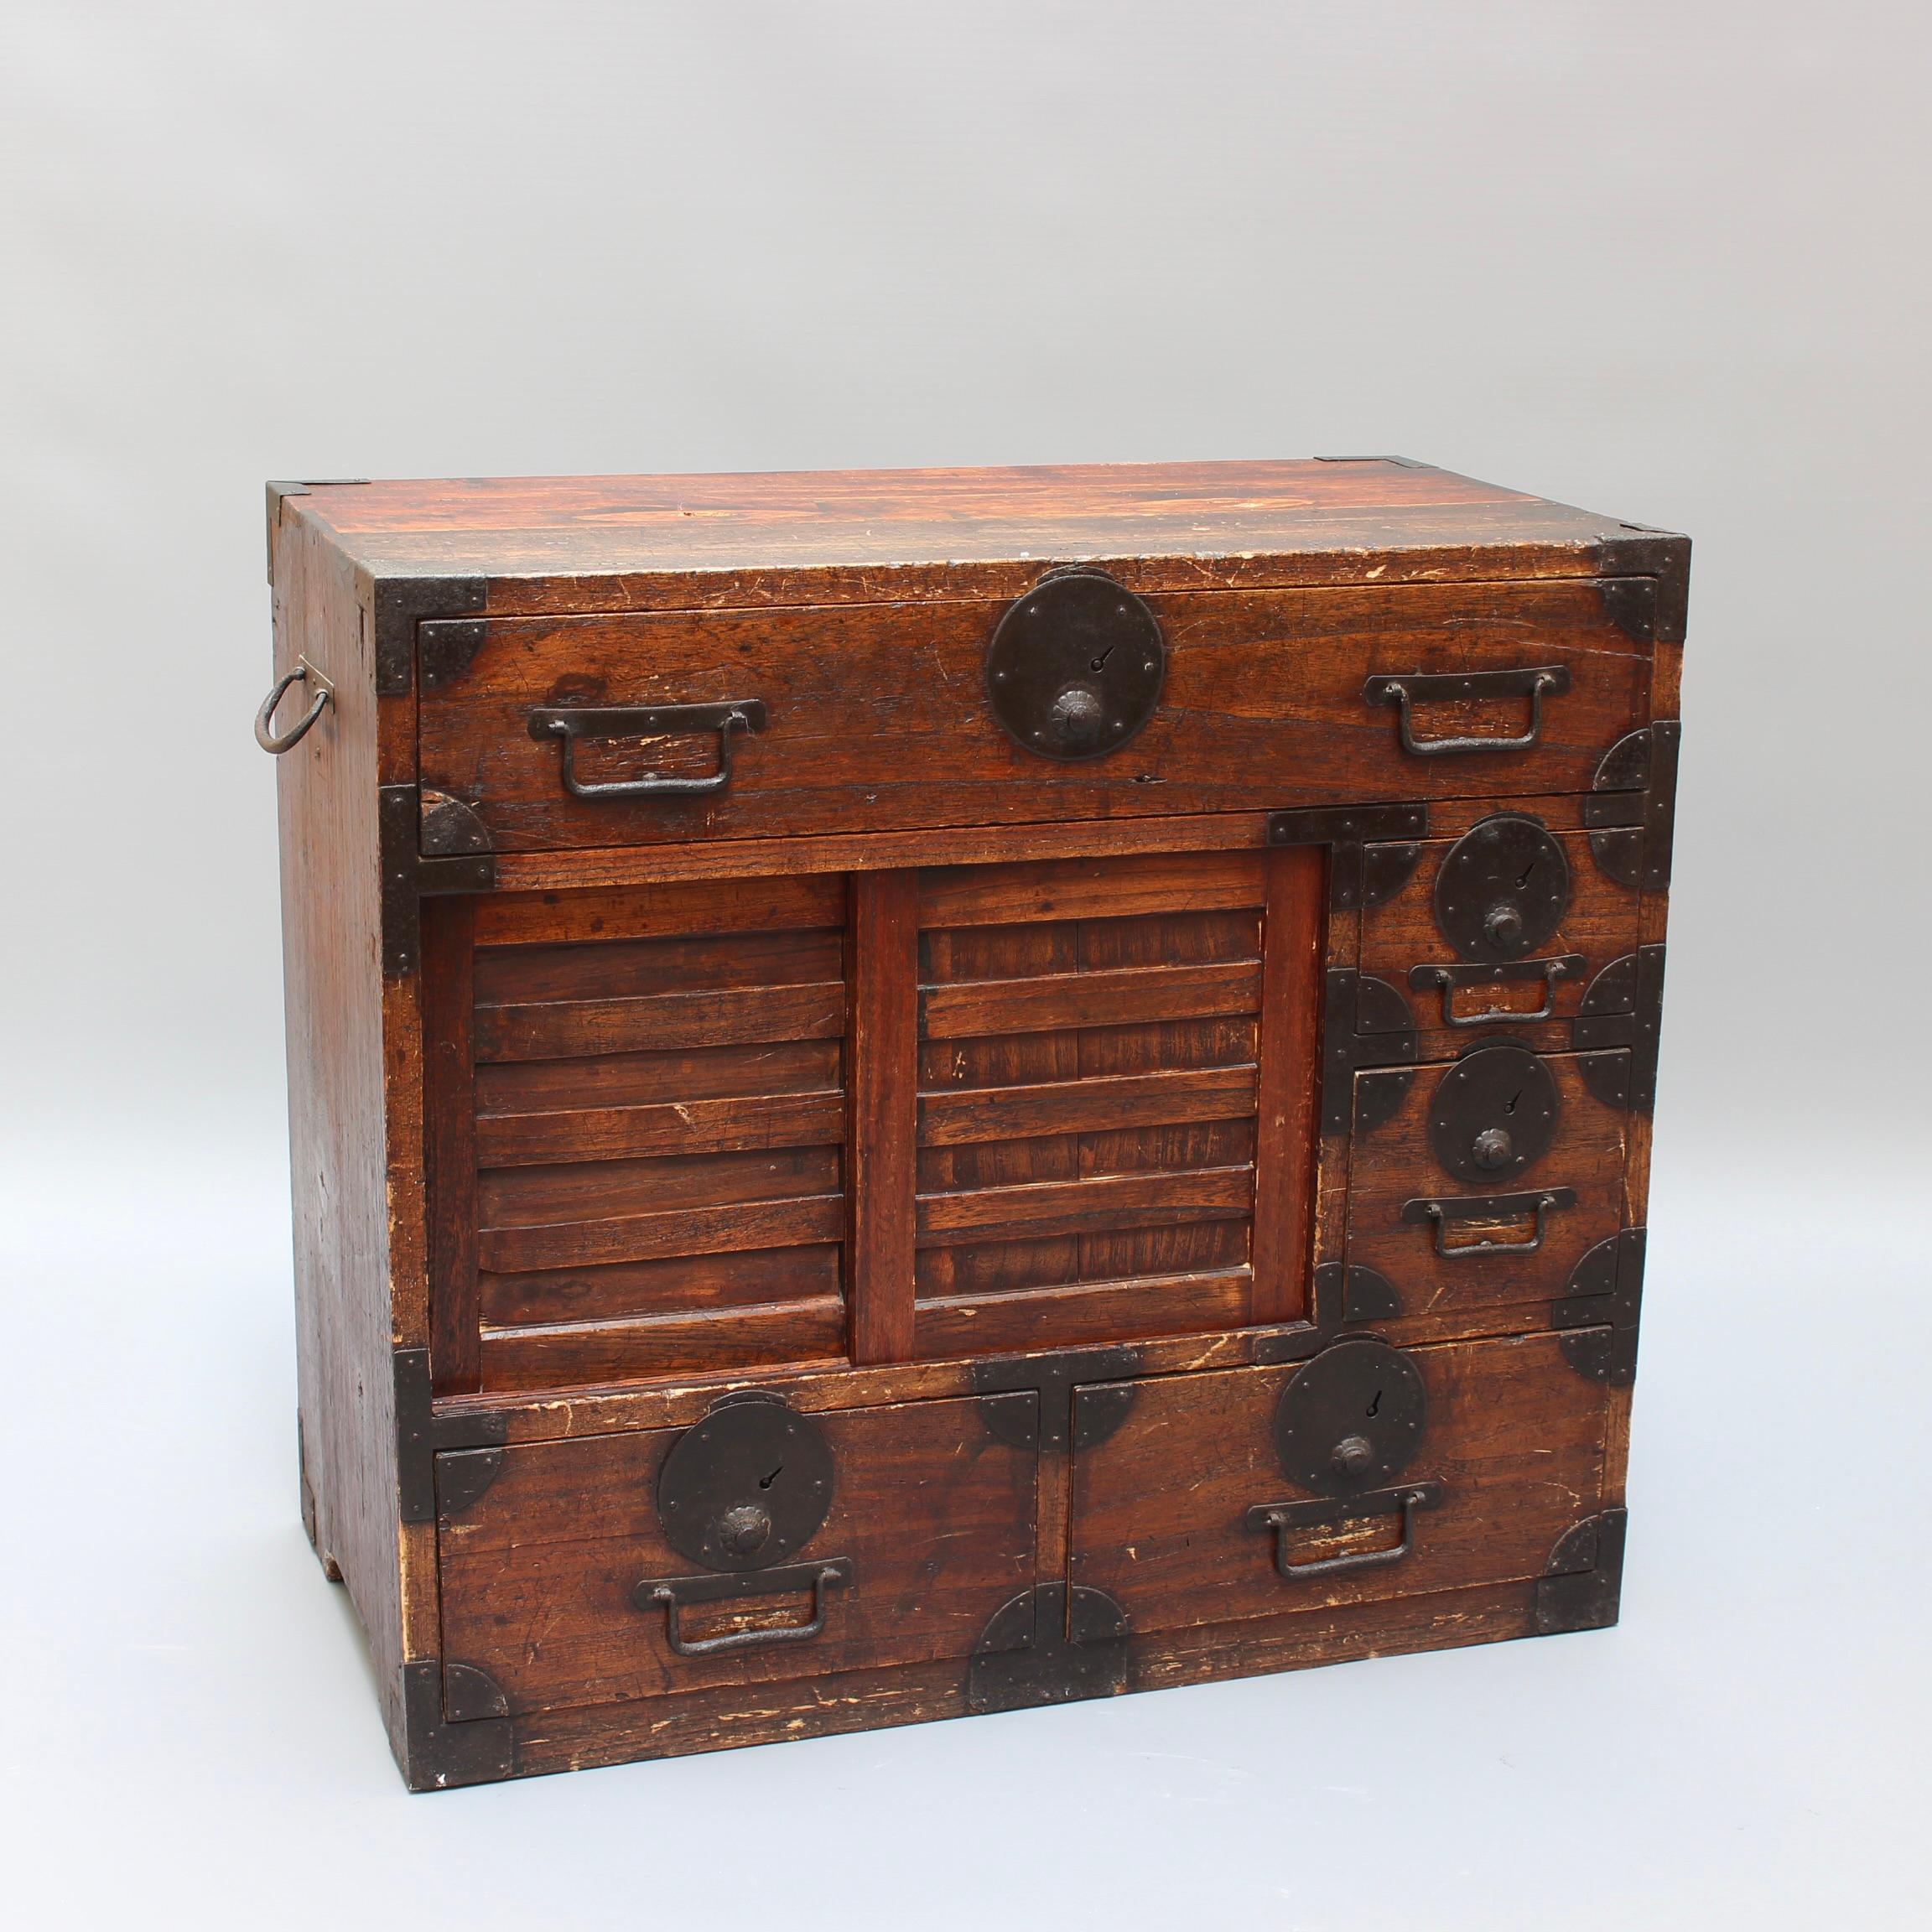 Japanese Tansu Storage Chest (Edo Period - 19th Century). Tansu are traditional portable wooden storage chests from Japan. In Japanese traditional houses, there were no fixed chairs, tables, or pieces of furniture in the living space. Tansu were